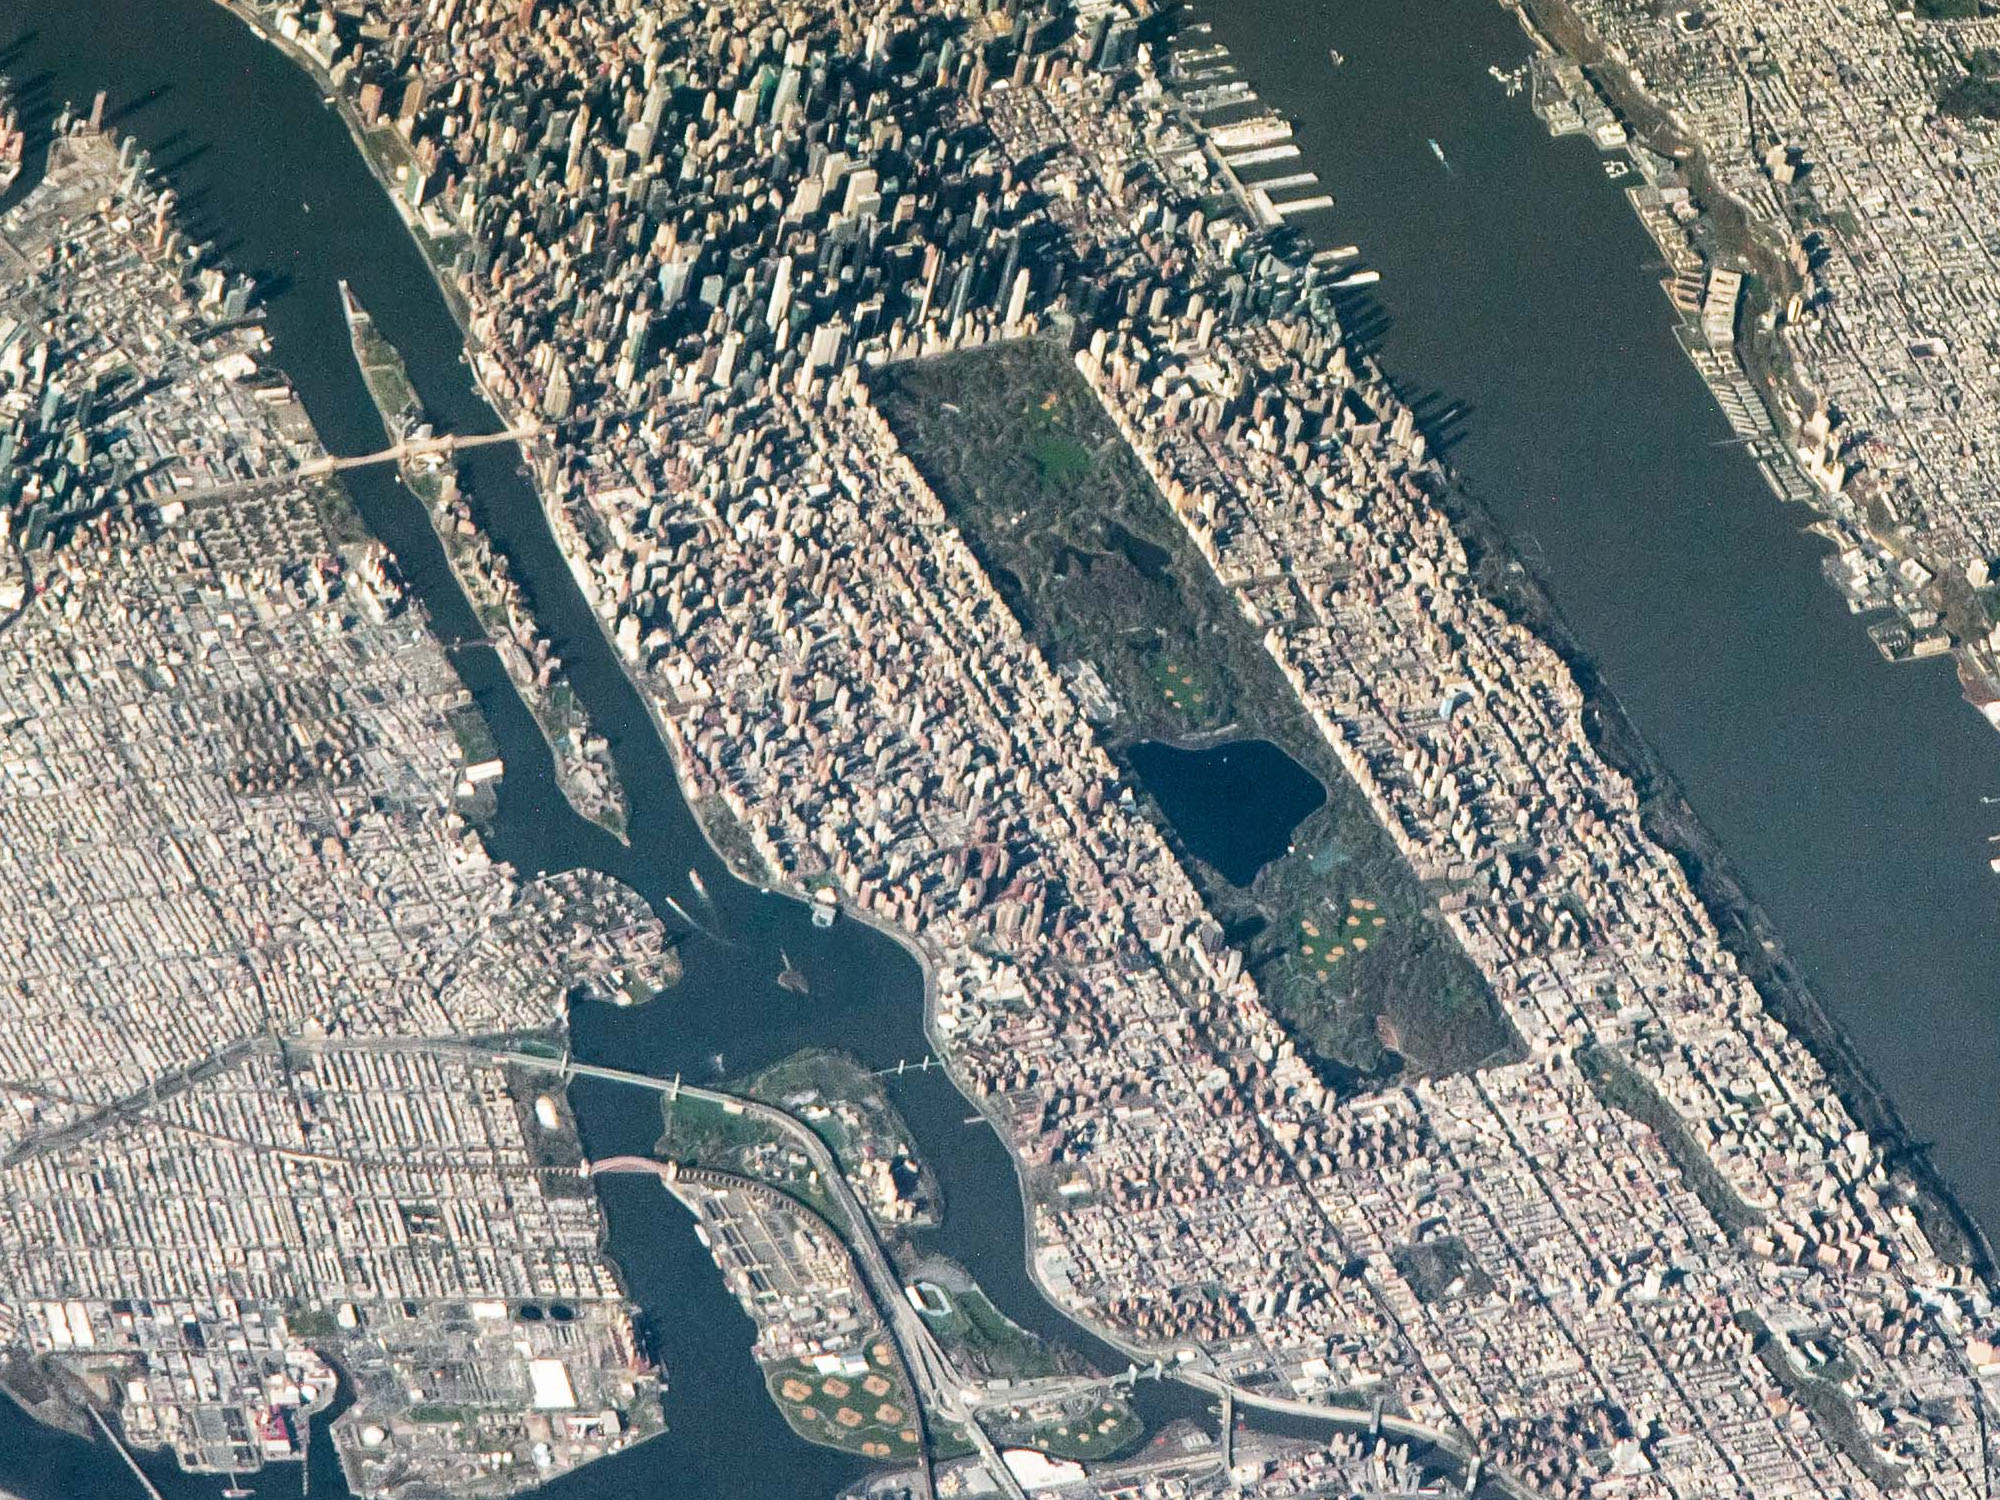 Photo of part of Manhattan, including all of Central Park, taken from the International Space Station one morning in April 2022. The photo is looking from north to south and the shadows of Midtown skyscrapers stretch westward.